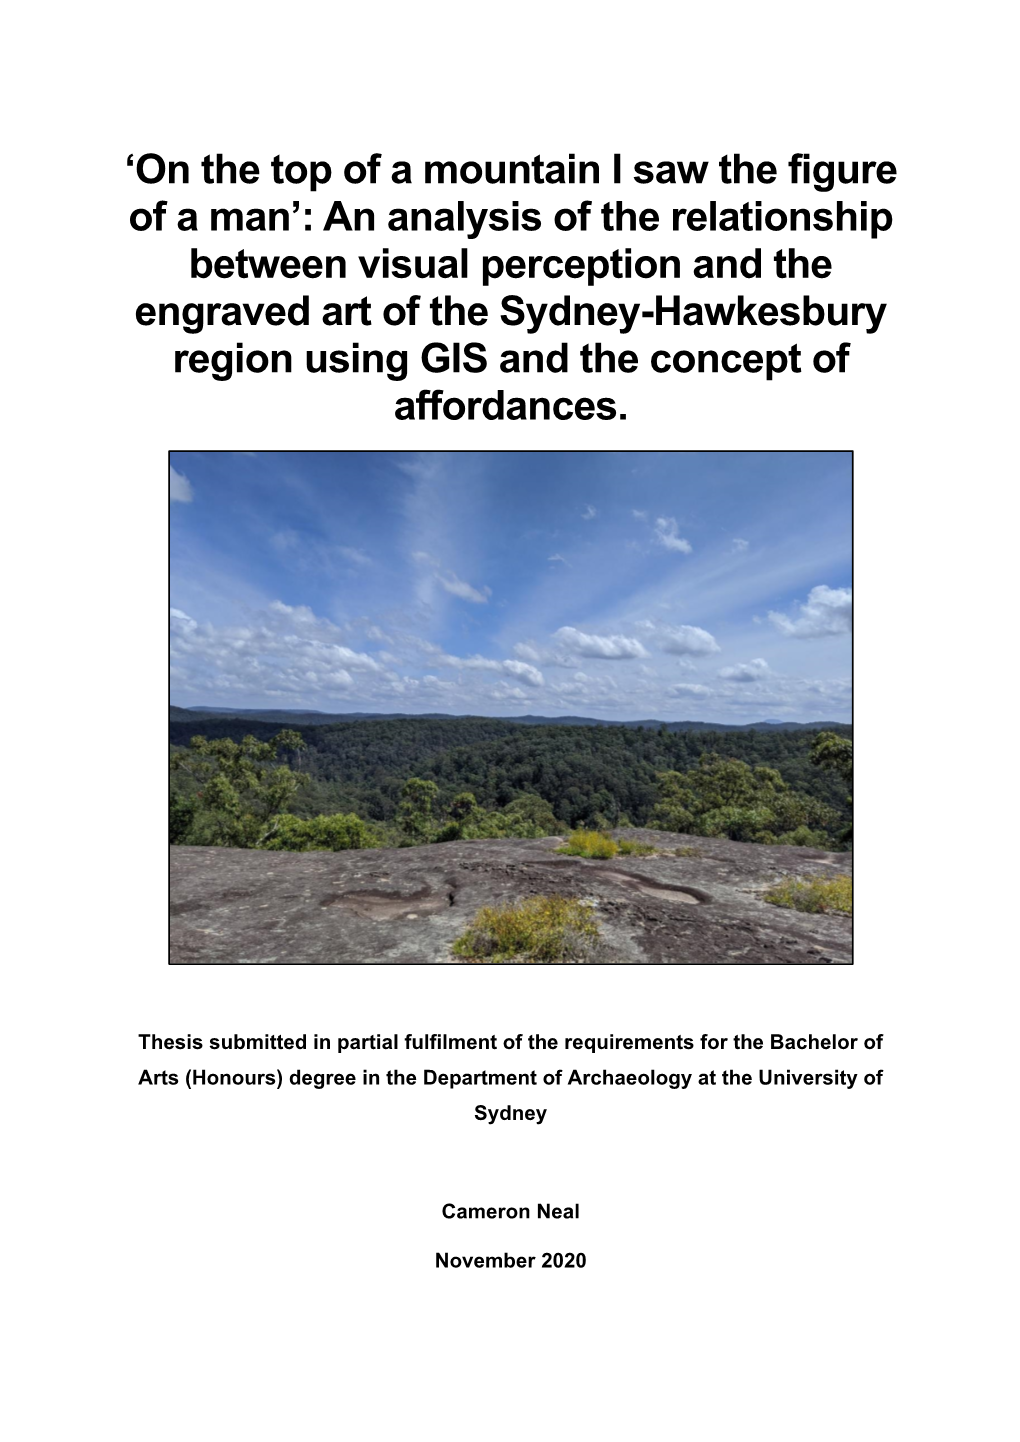 An Analysis of the Relationship Between Visual Perception and the Engraved Art of the Sydney-Hawkesbury Region Using GIS and the Concept of Affordances